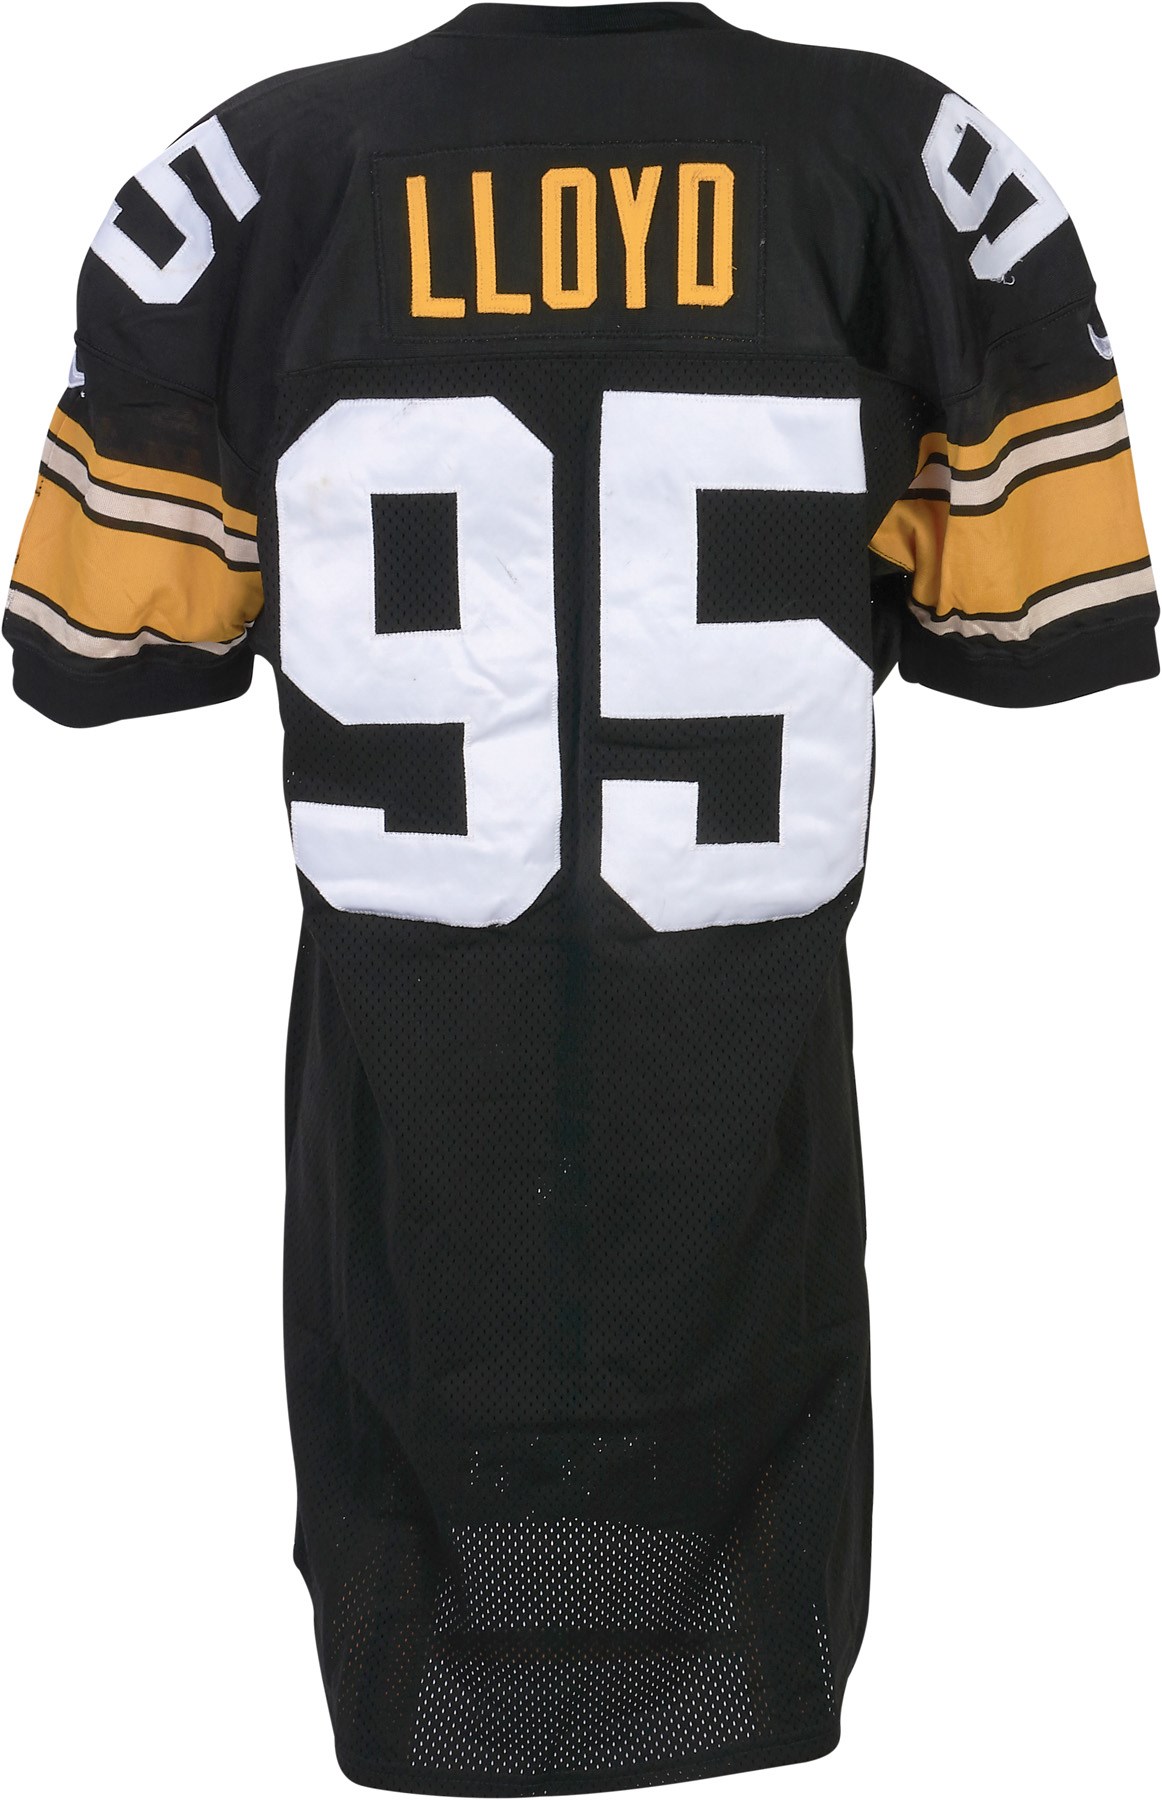 1996 Greg Lloyd Pittsburgh Steelers Game Worn Jersey (Photo-Matched)